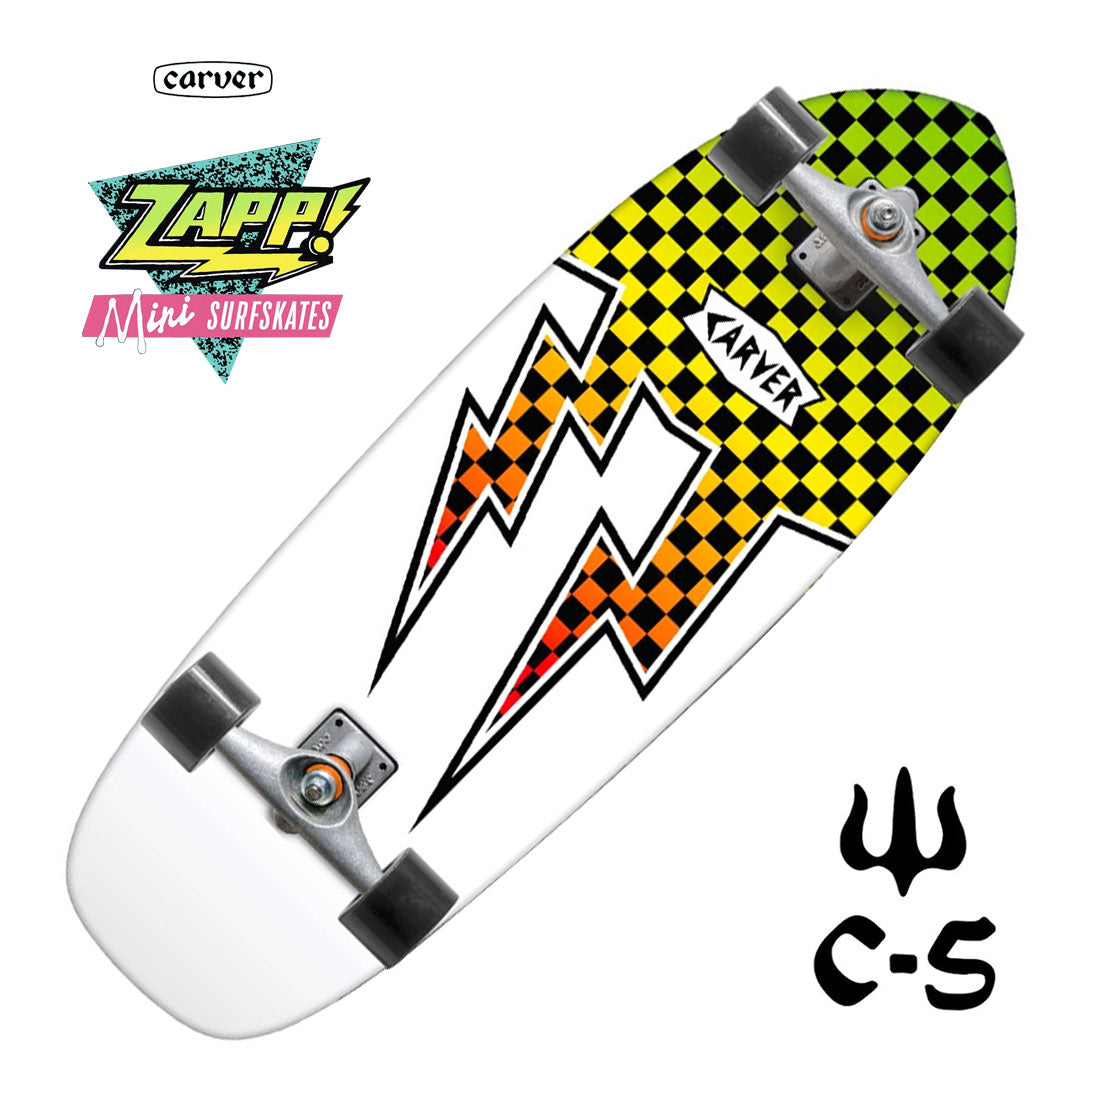 Carver Zapper Snapper 27 C5 Mini Complete Skateboard Compl Carving and Specialty